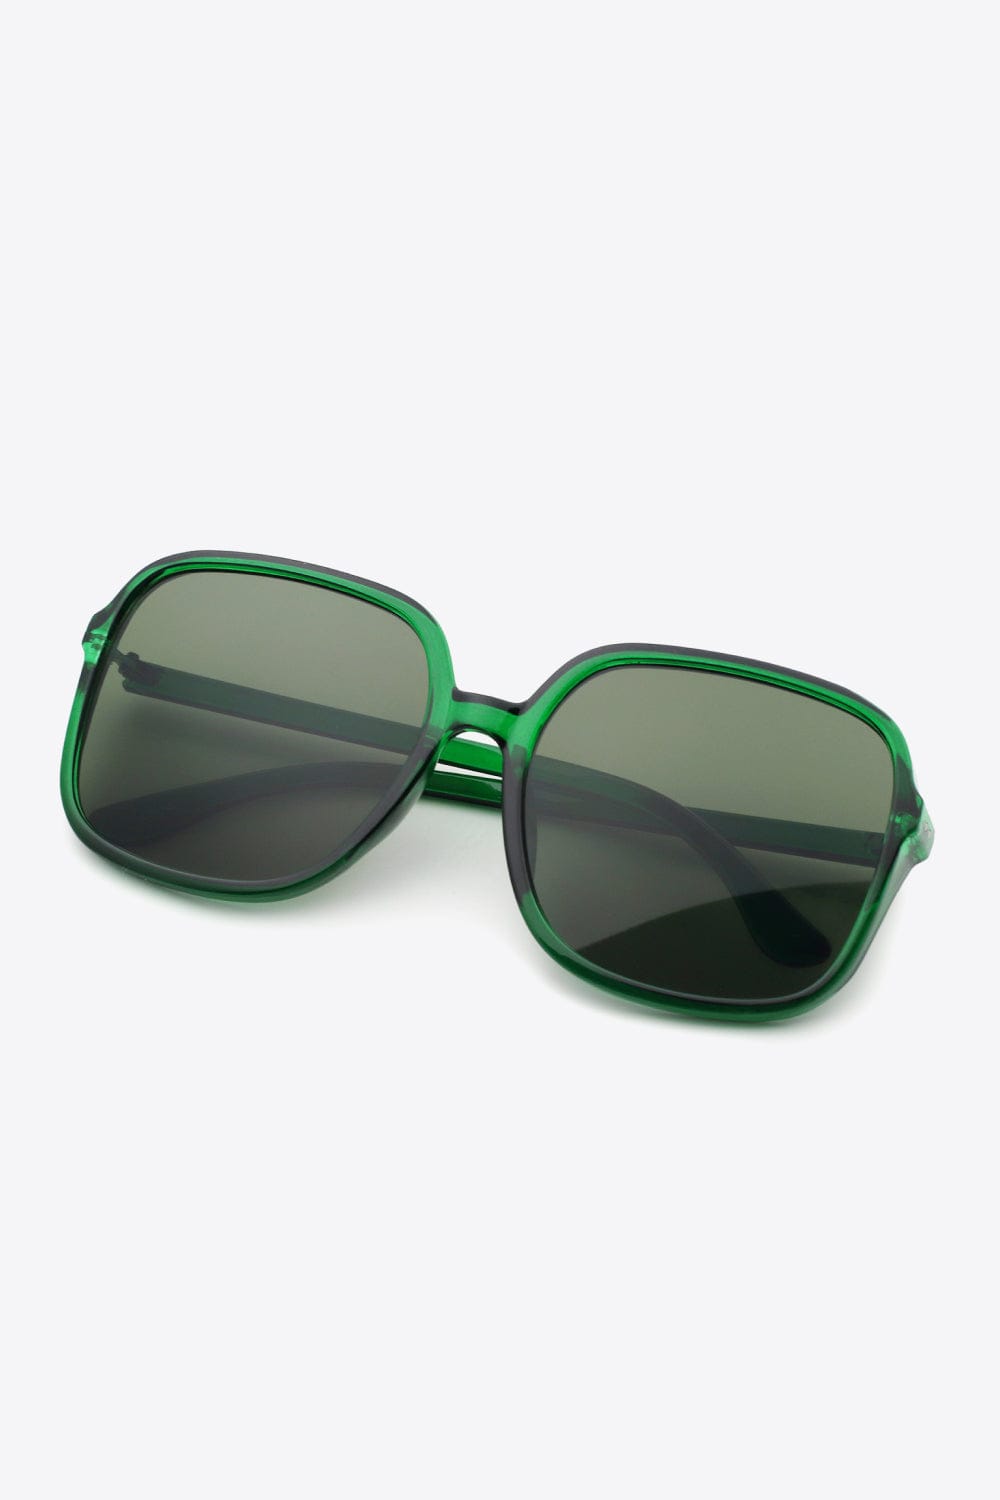 The802Gypsy sunglasses Mid Green / One Size GYPSY-Polycarbonate Square Sunglasses